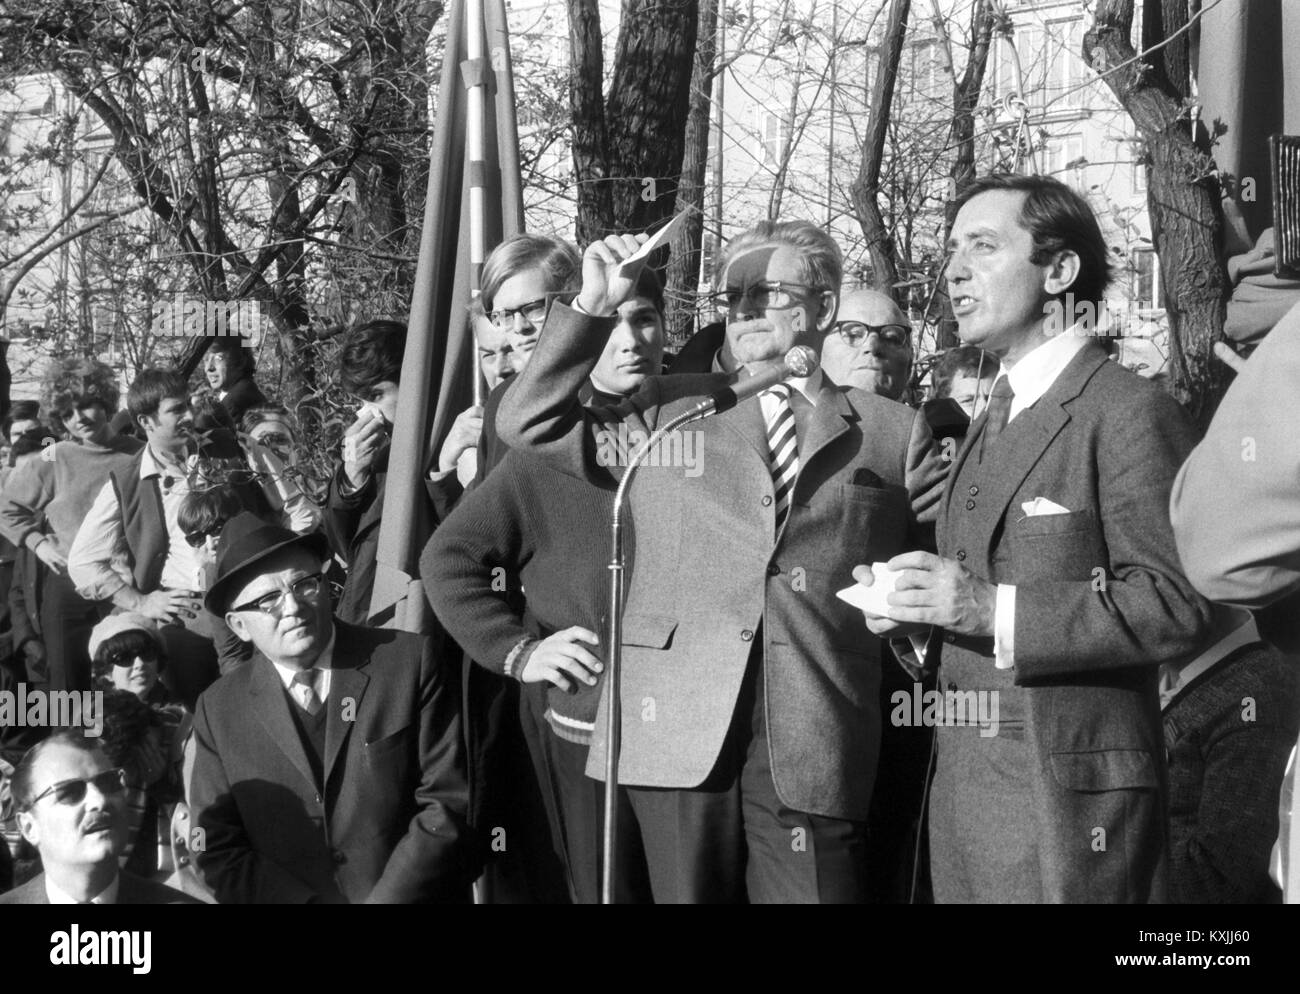 The main speaker of the Easter March rally, Prof. Dr. Gustav Heckermann (center), to the right actor Hans Clarin, during the traditional Easter march in Munich on 15 April 1968. | usage worldwide Stock Photo